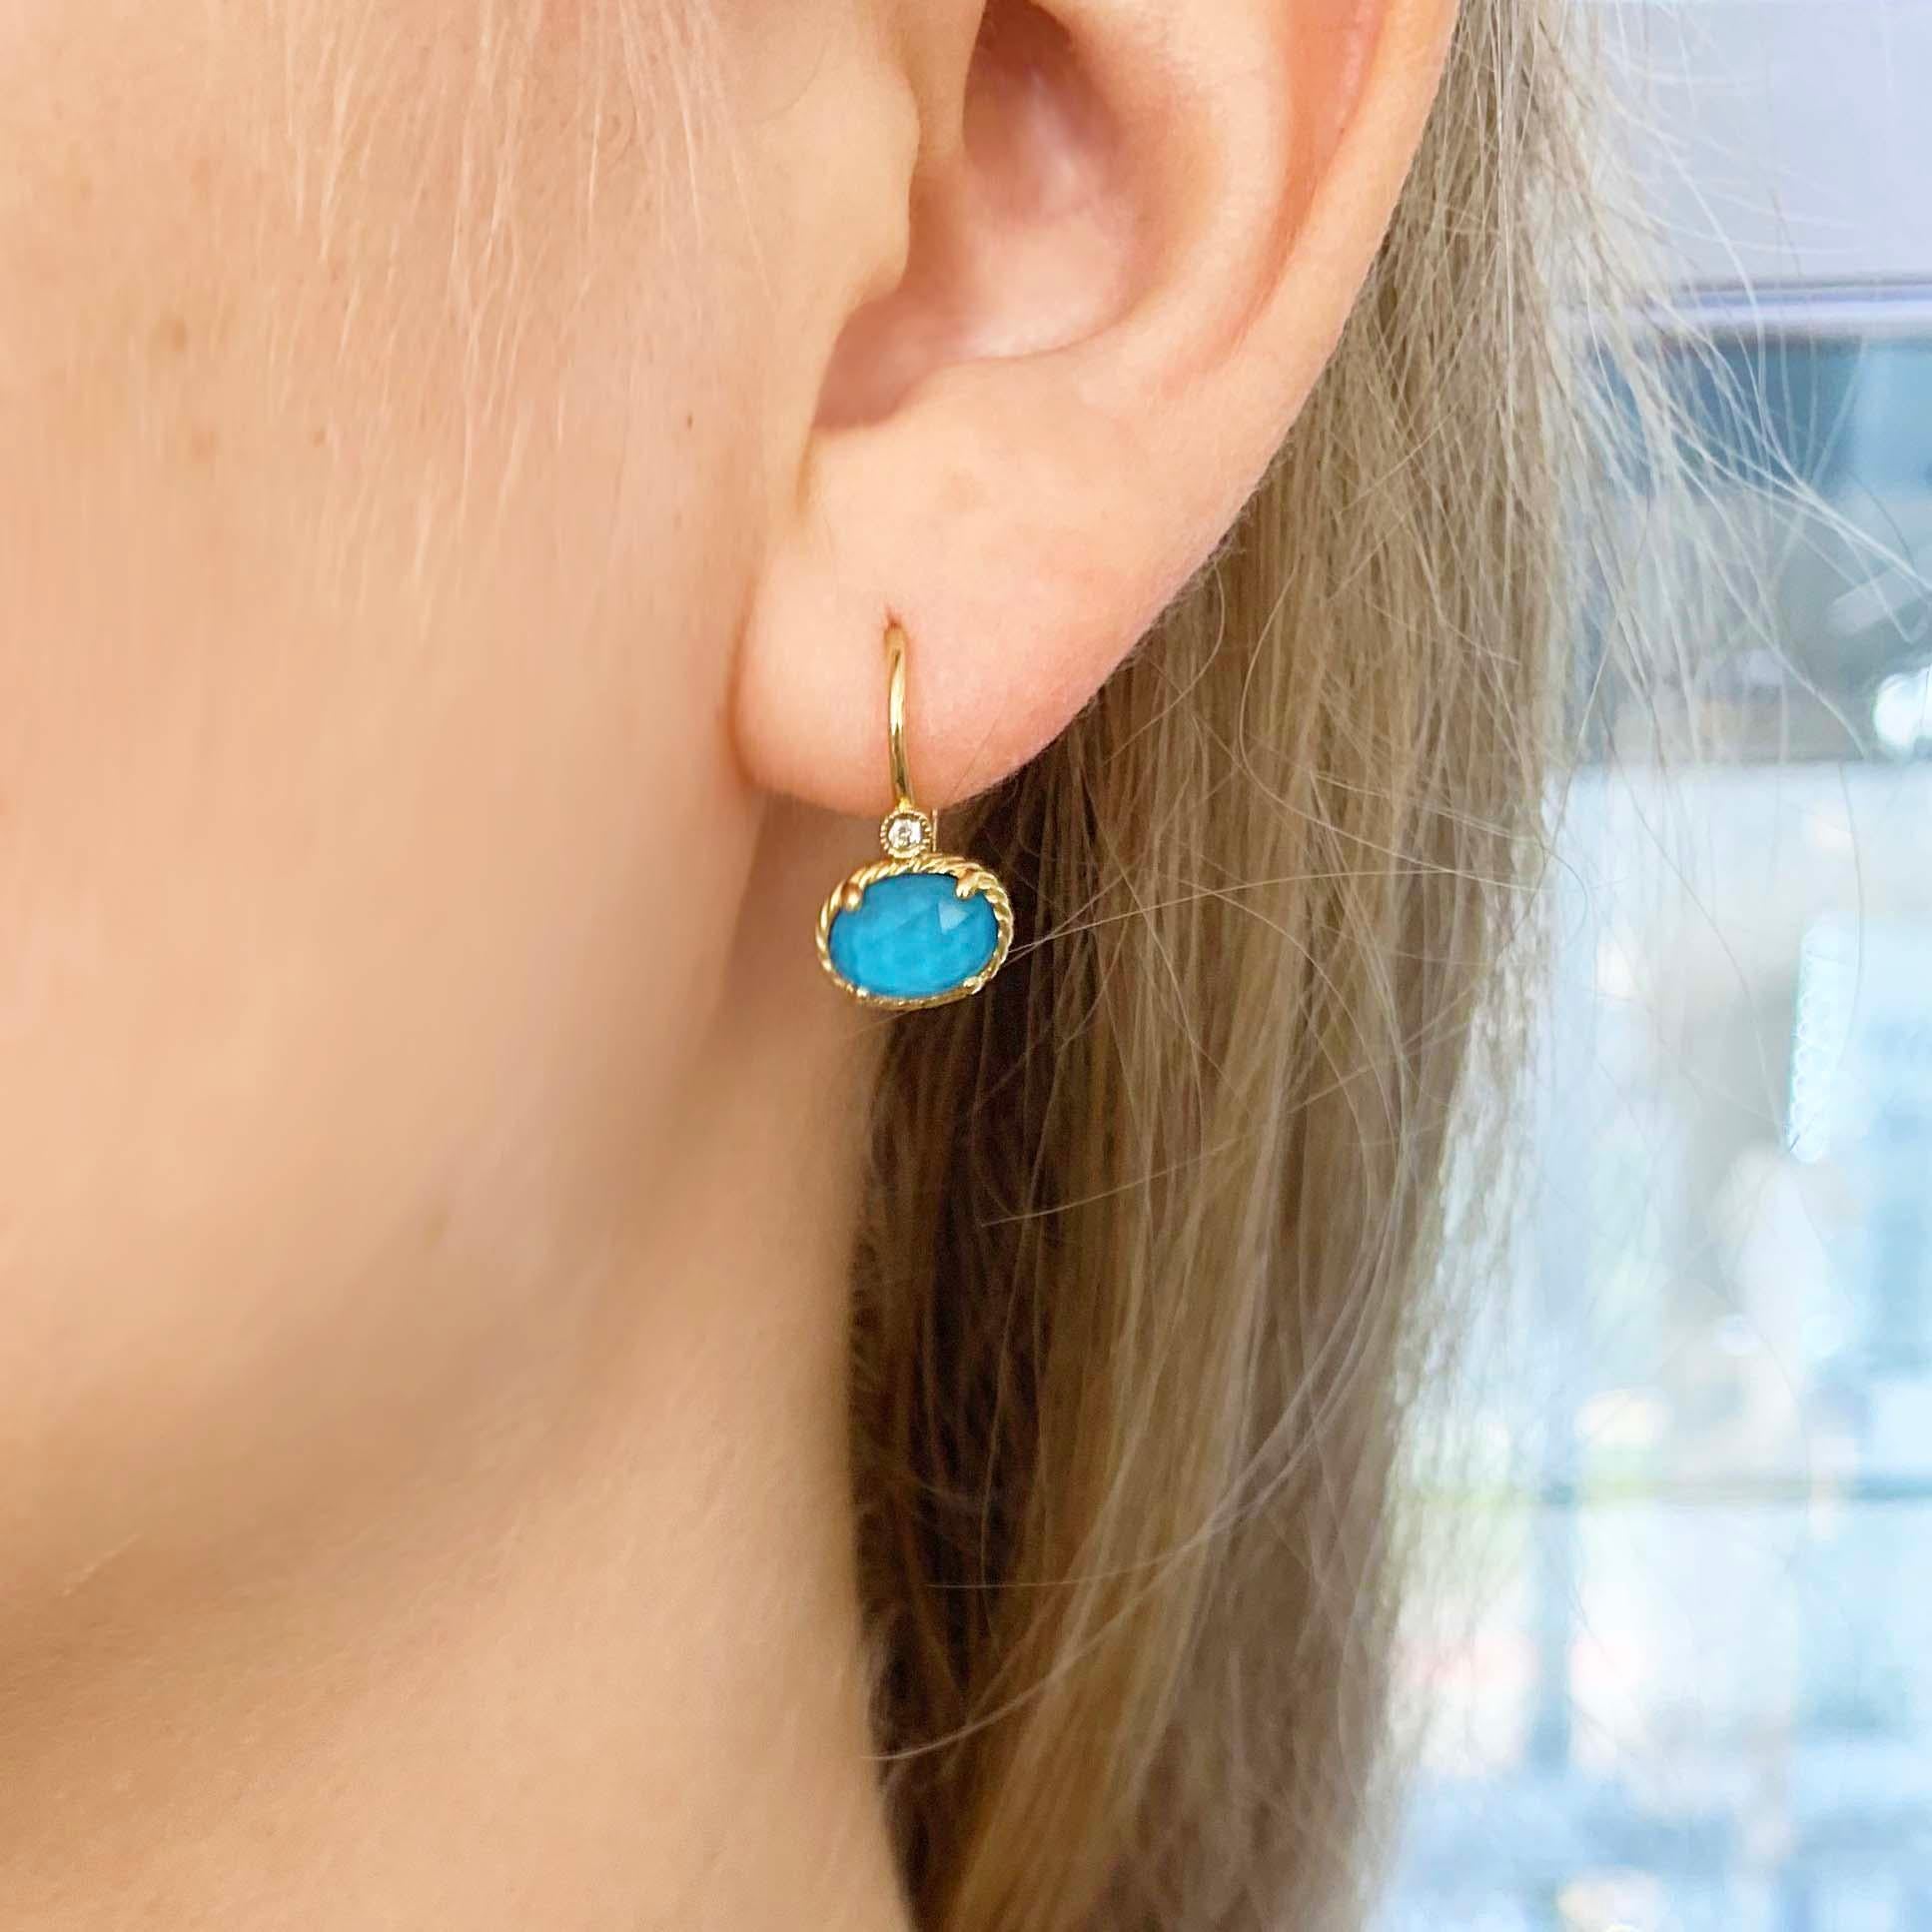 These 14kt yellow gold, adorable turquoise and diamond earrings are bold and beautiful! With a genuine piece of natural turquoise set under a faceted clear quartz gemstone. The clear quartz adds an extra layer to the turquoise and makes the overall